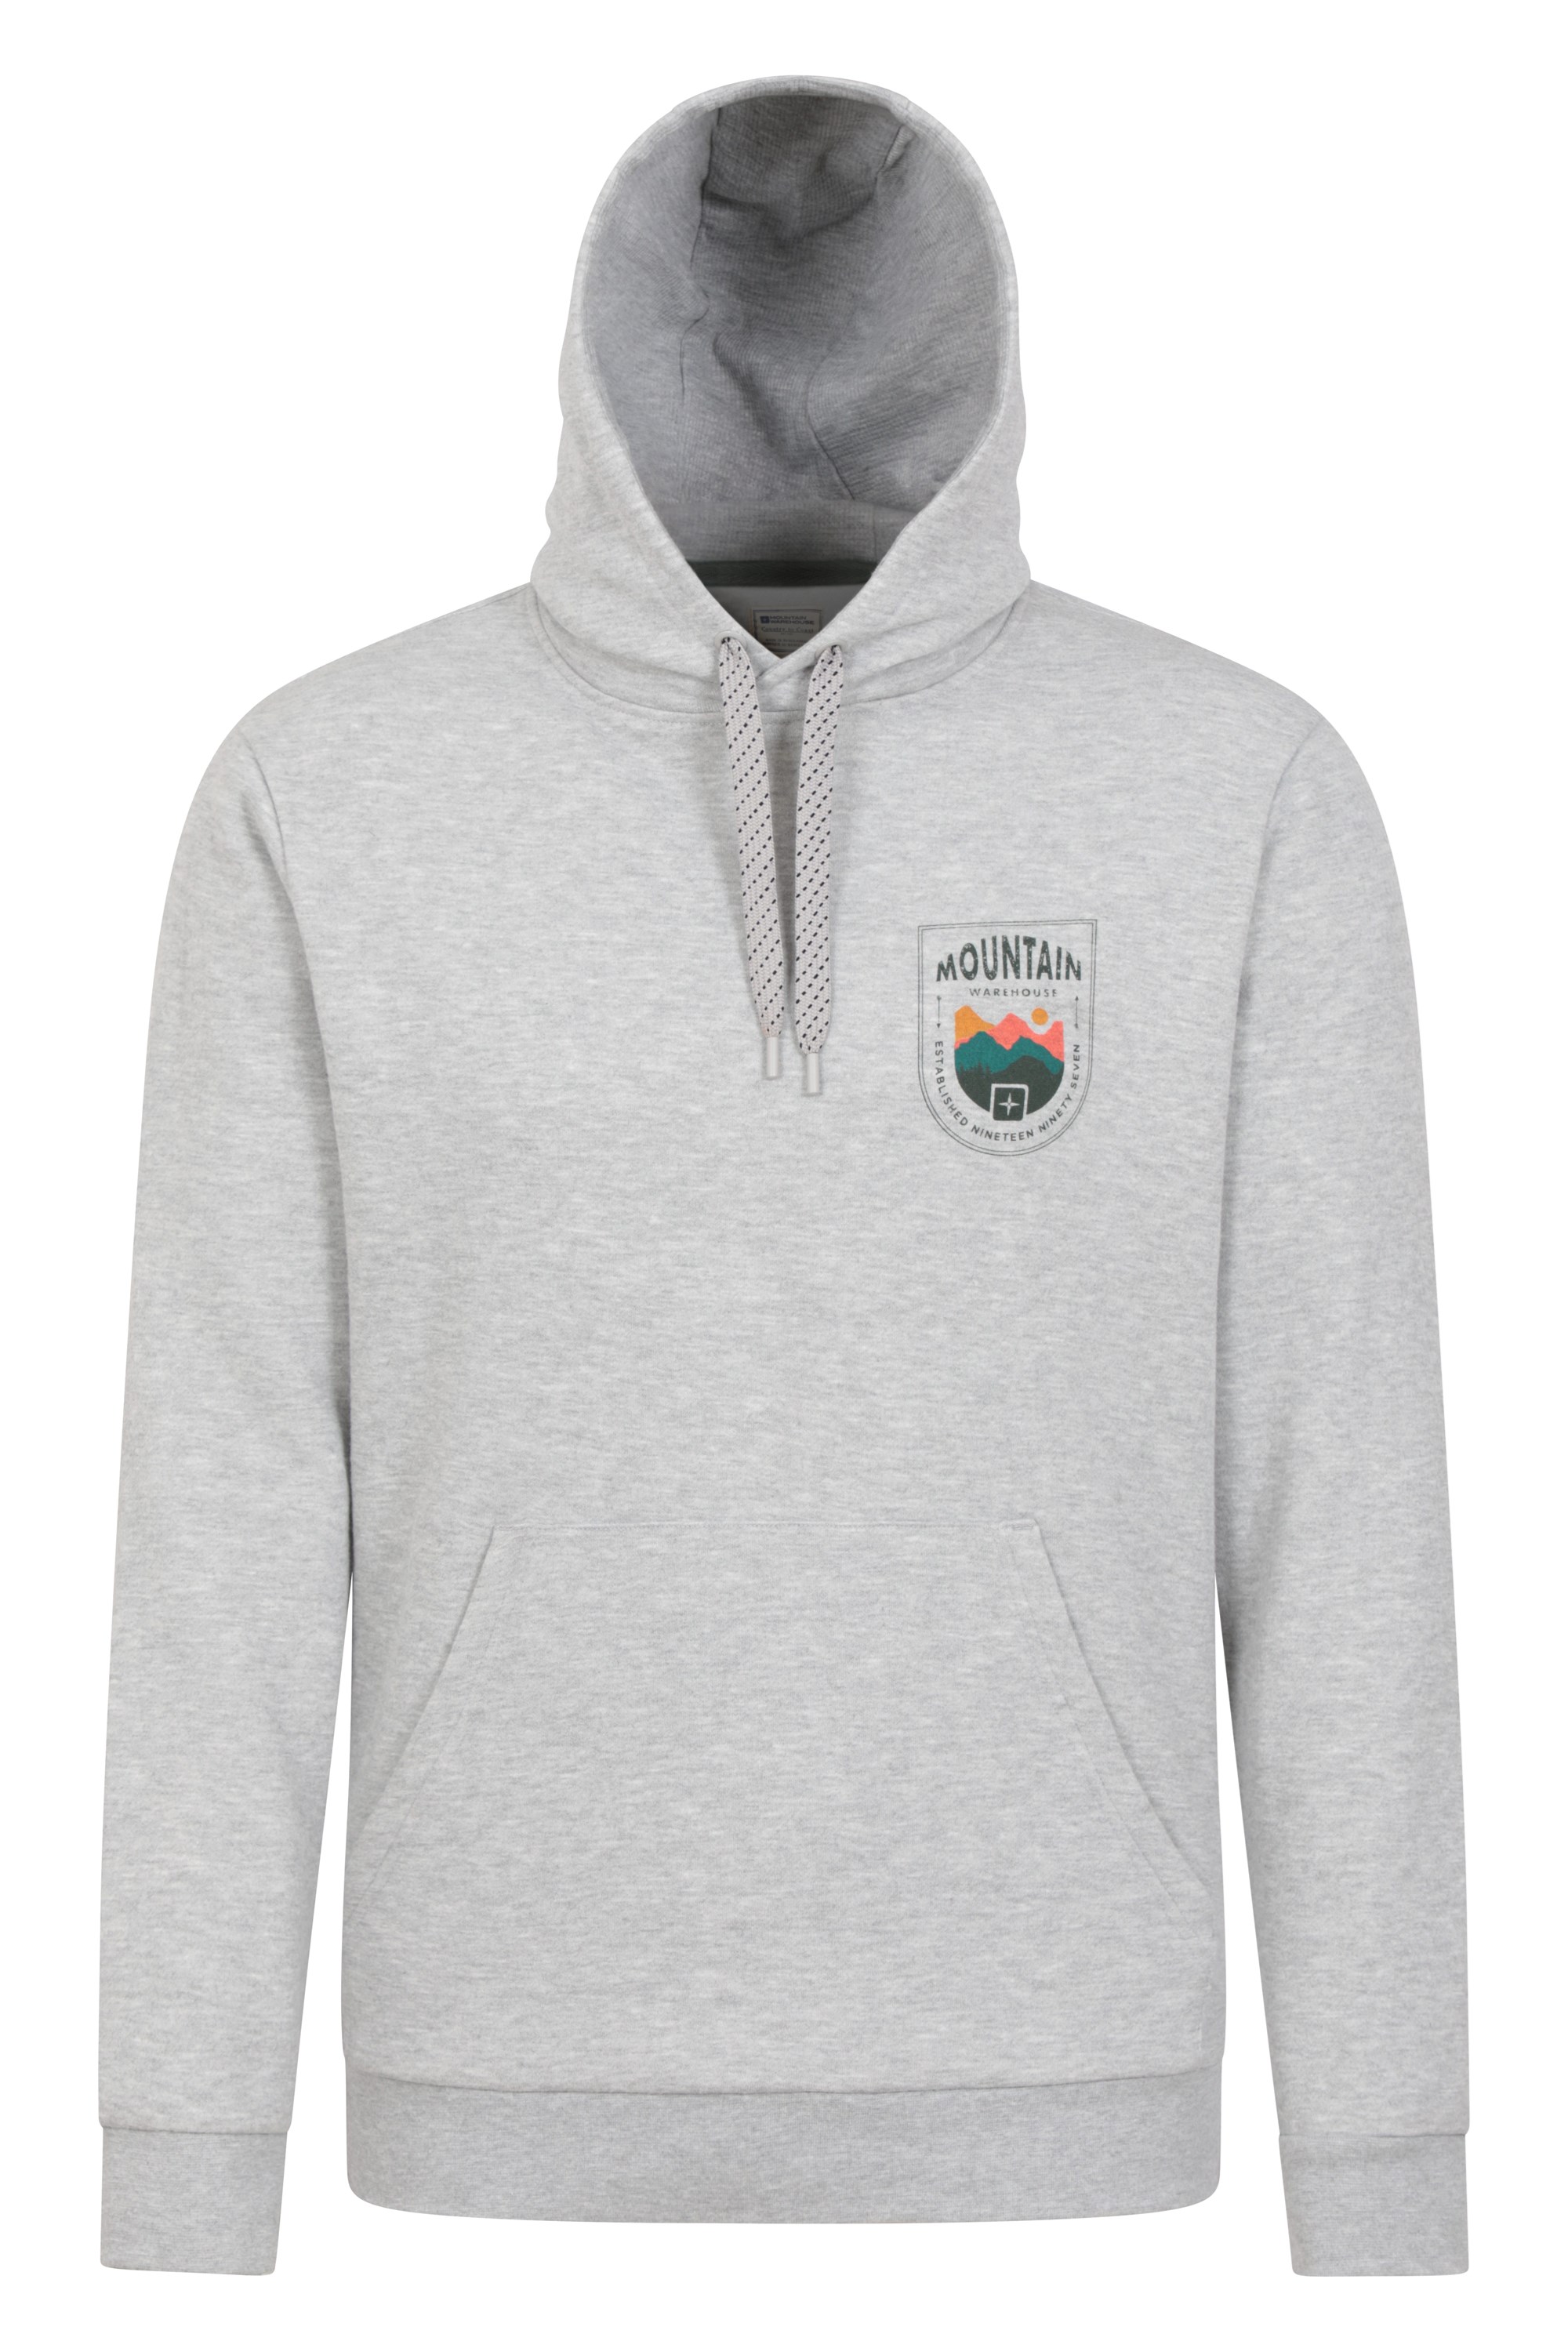 Crest Mountain Mens Graphic Hoodie - Grey